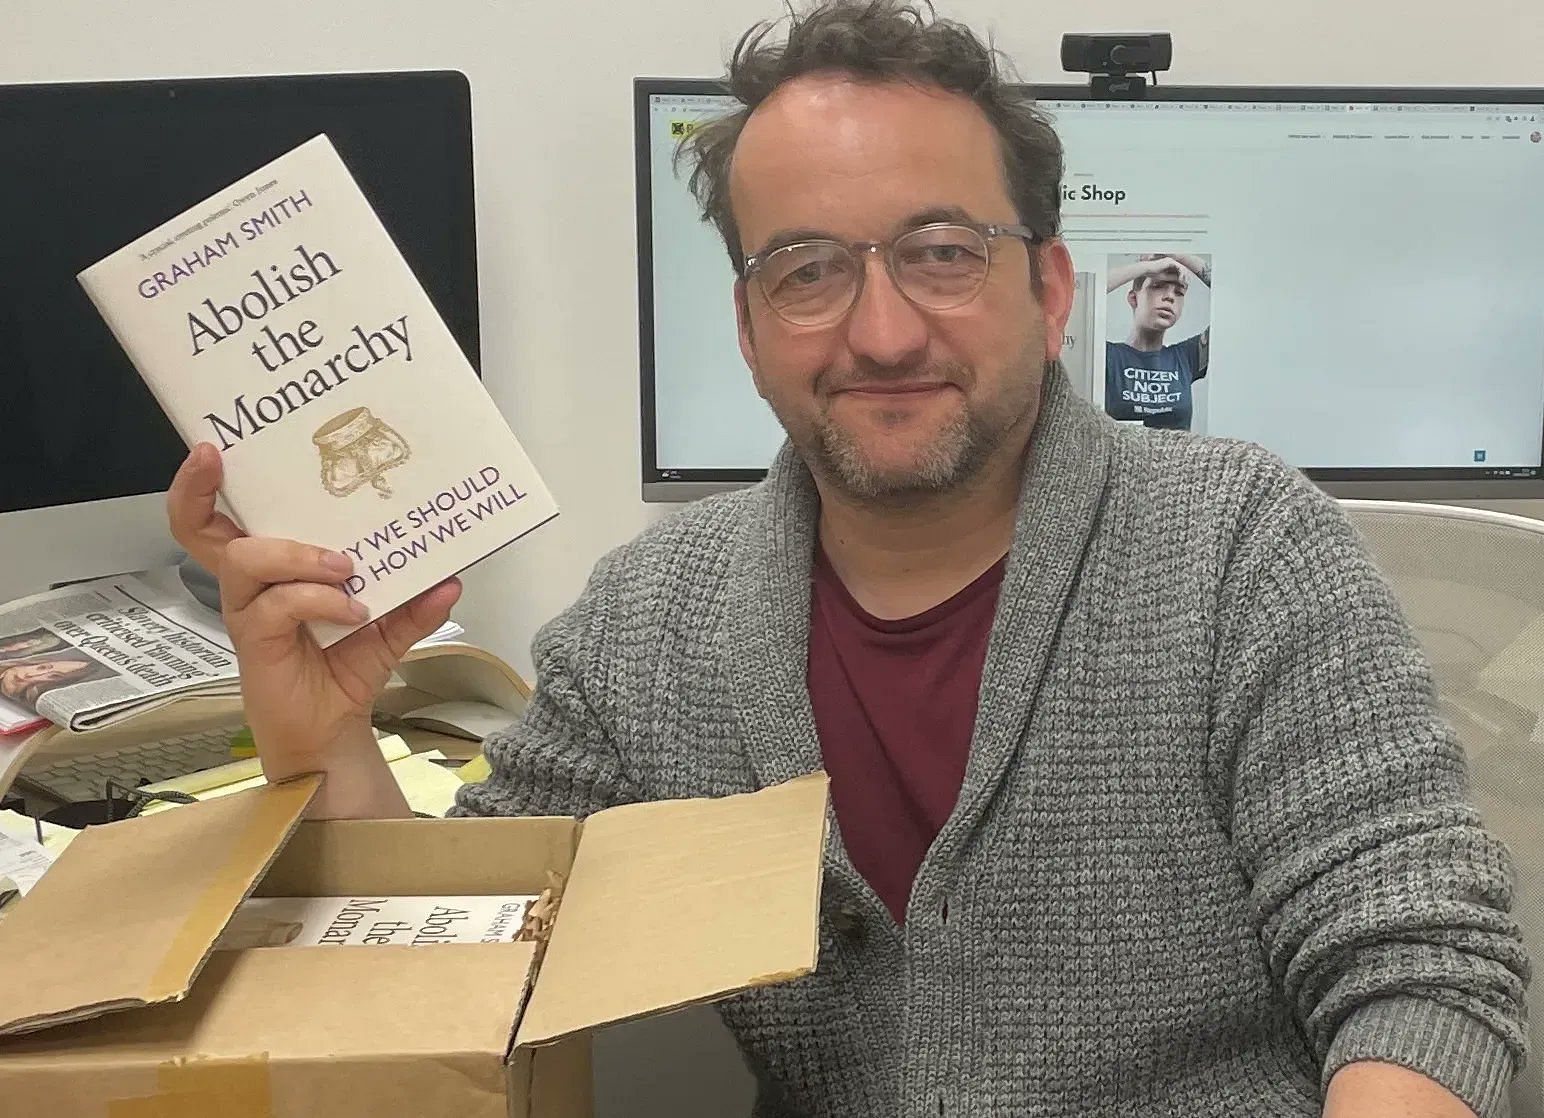 Graham Smith with the book he has authored (Image from X/@GrahamSmith_)